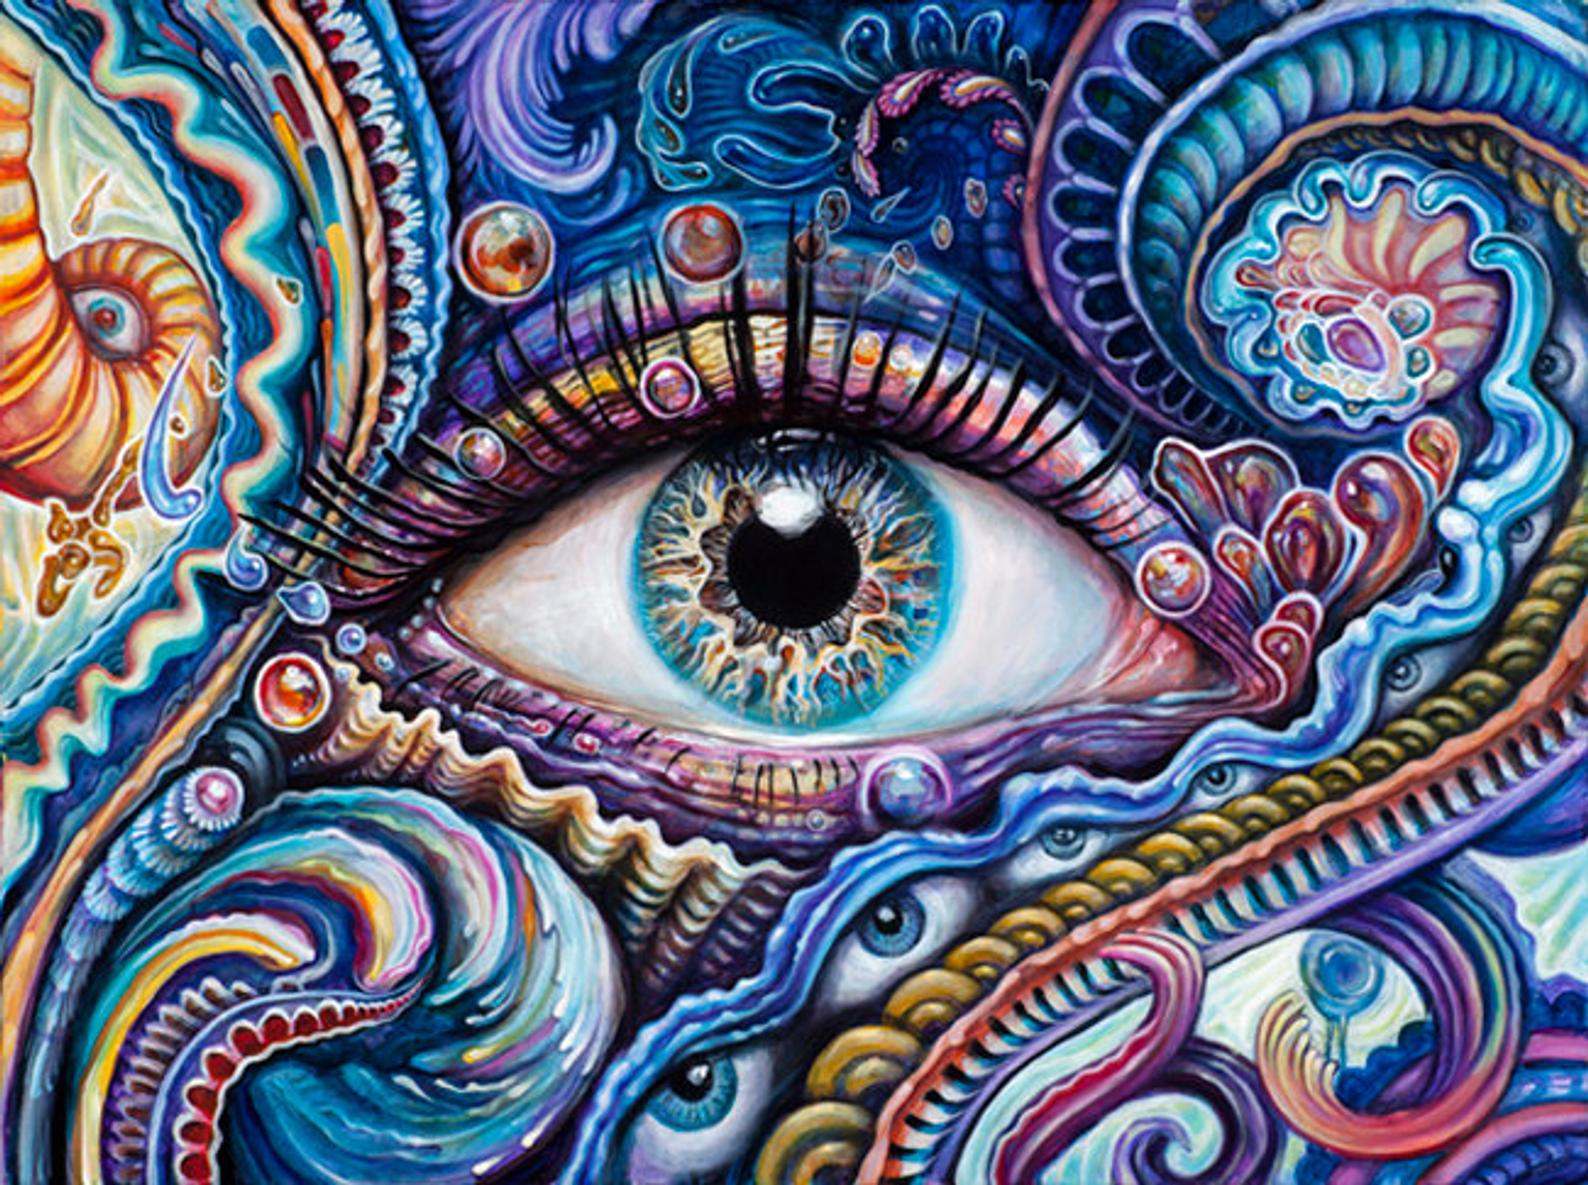 Trippy Art, Drawings & the Psychedelic Influence on Human Expression